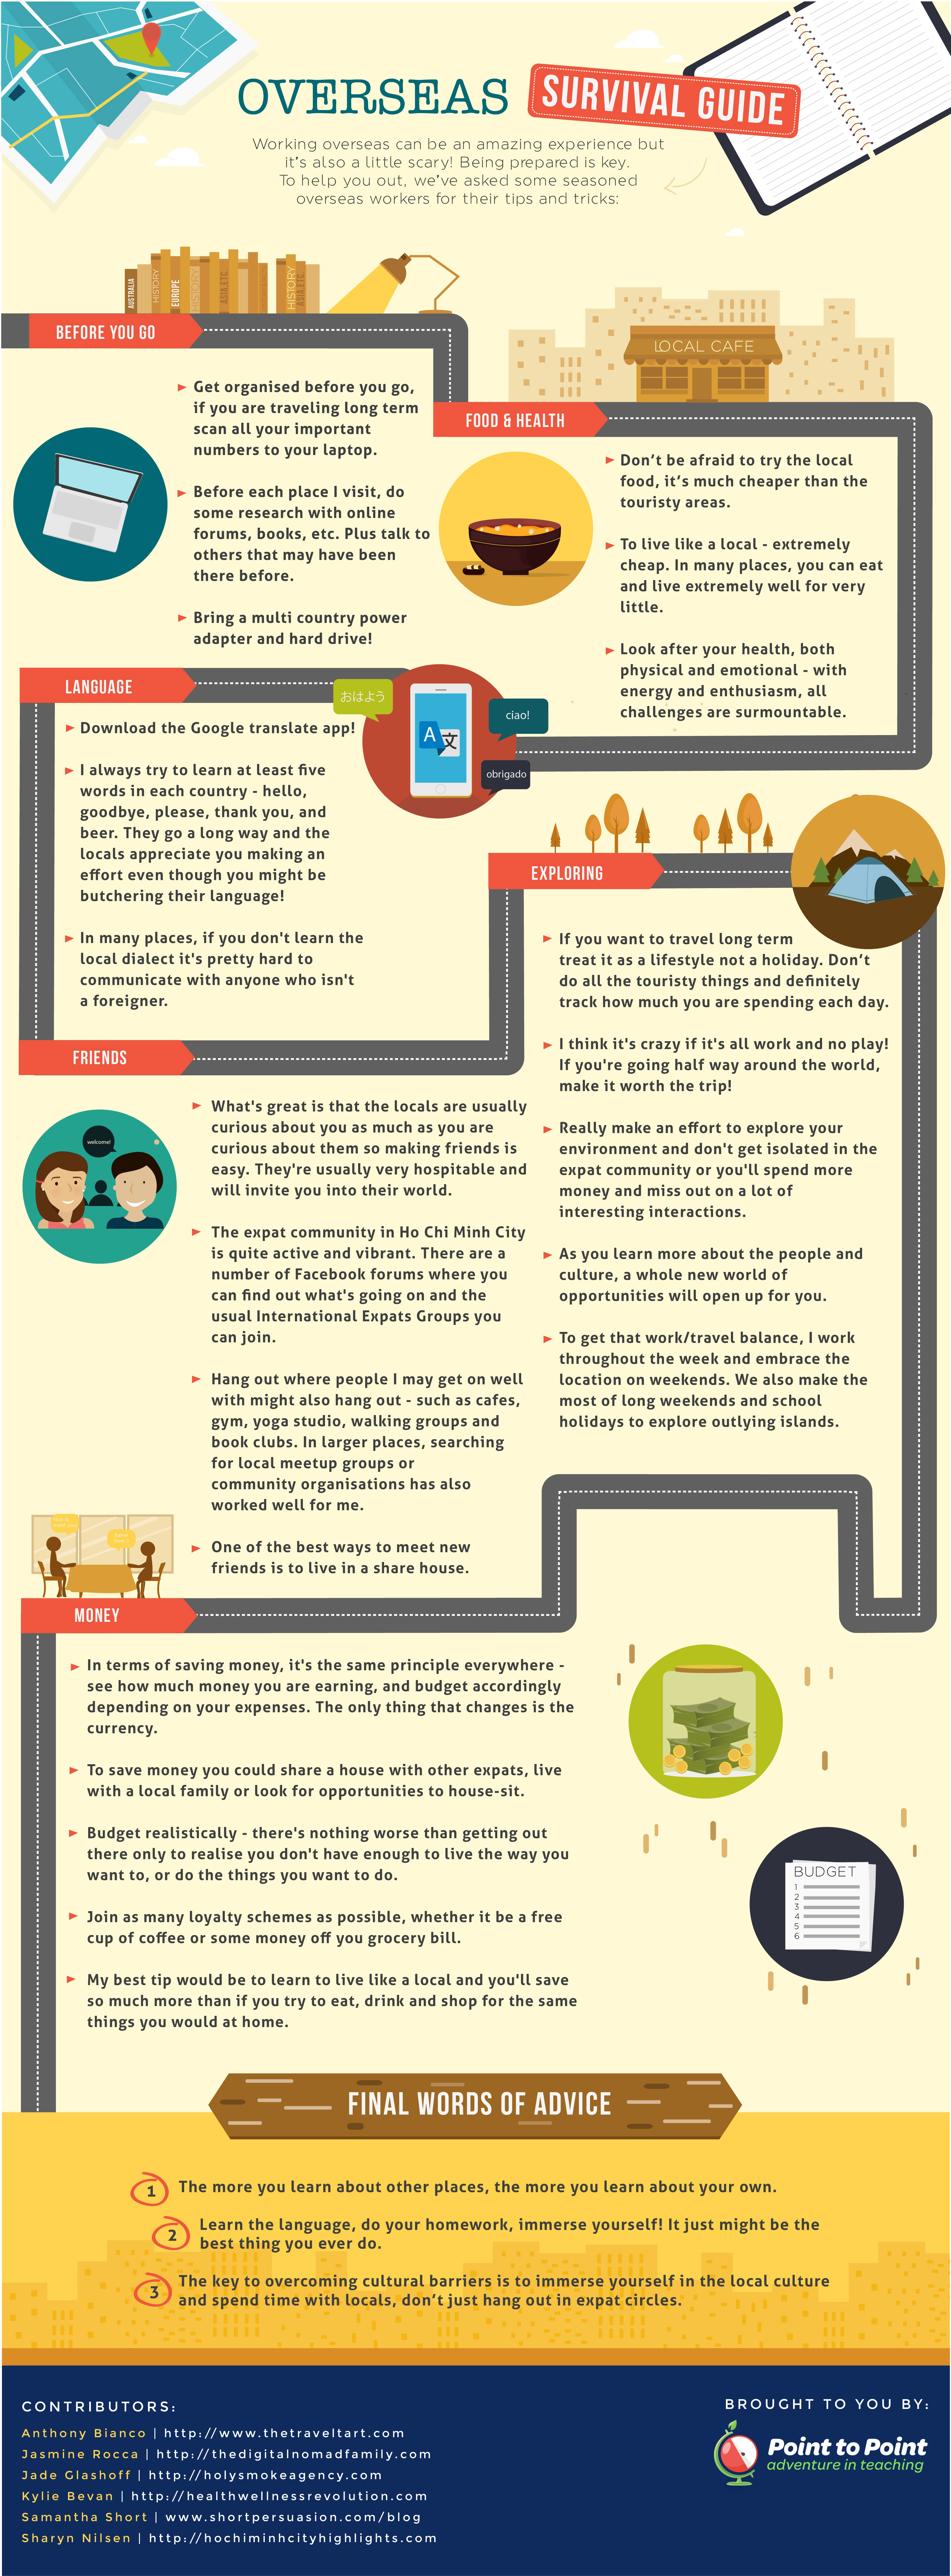 Point-To-Point-Education-Infographic-Overseas-Survival-Guide